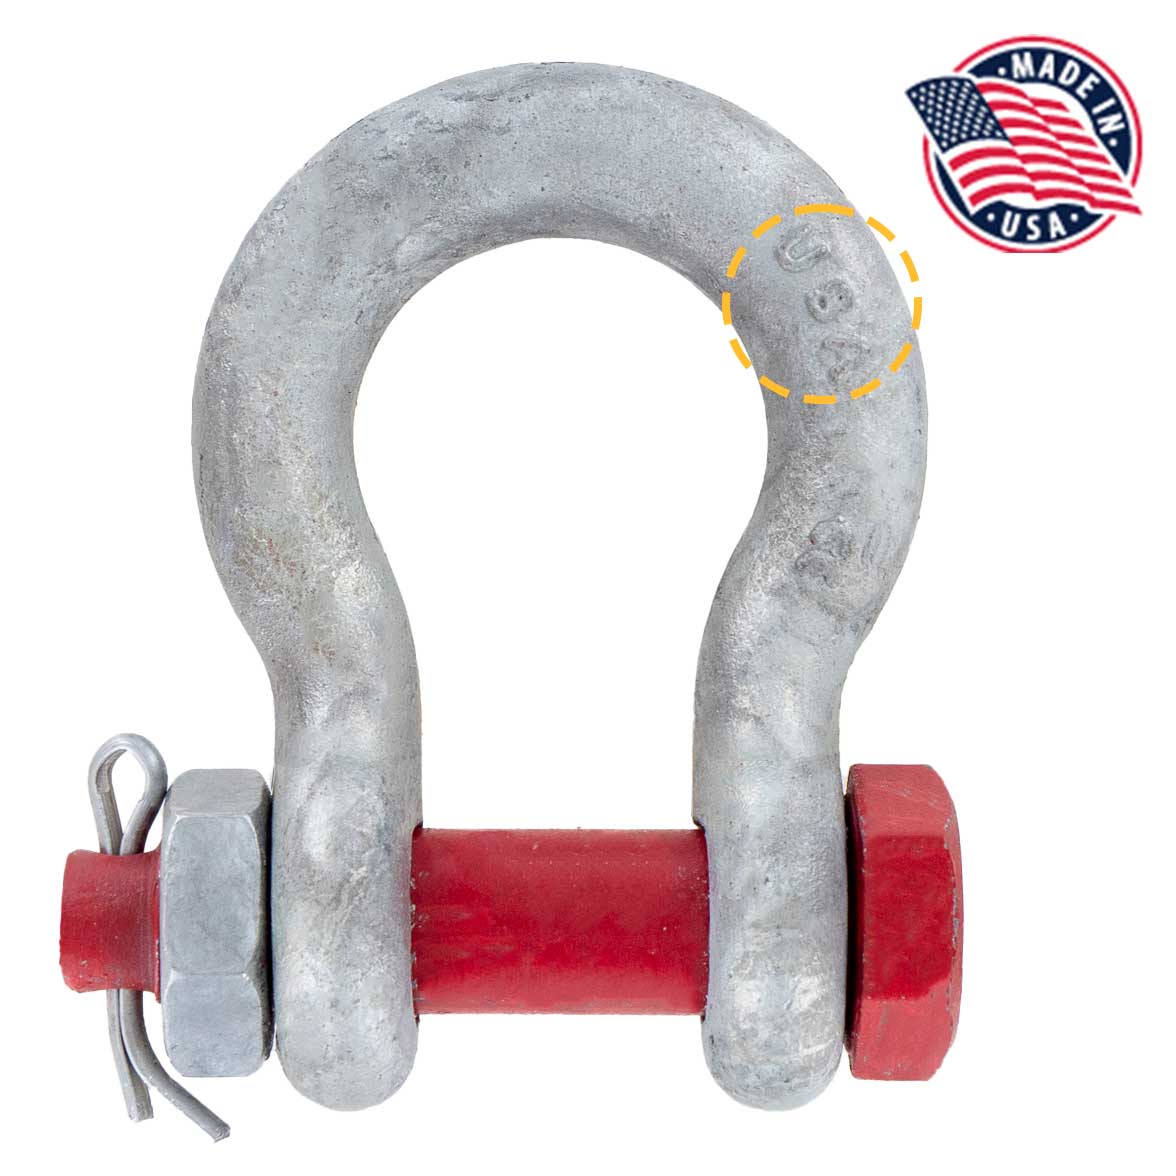 7/16" Crosby® Bolt Type Anchor Shackle | G-2130 - 1.5 Ton made in USA